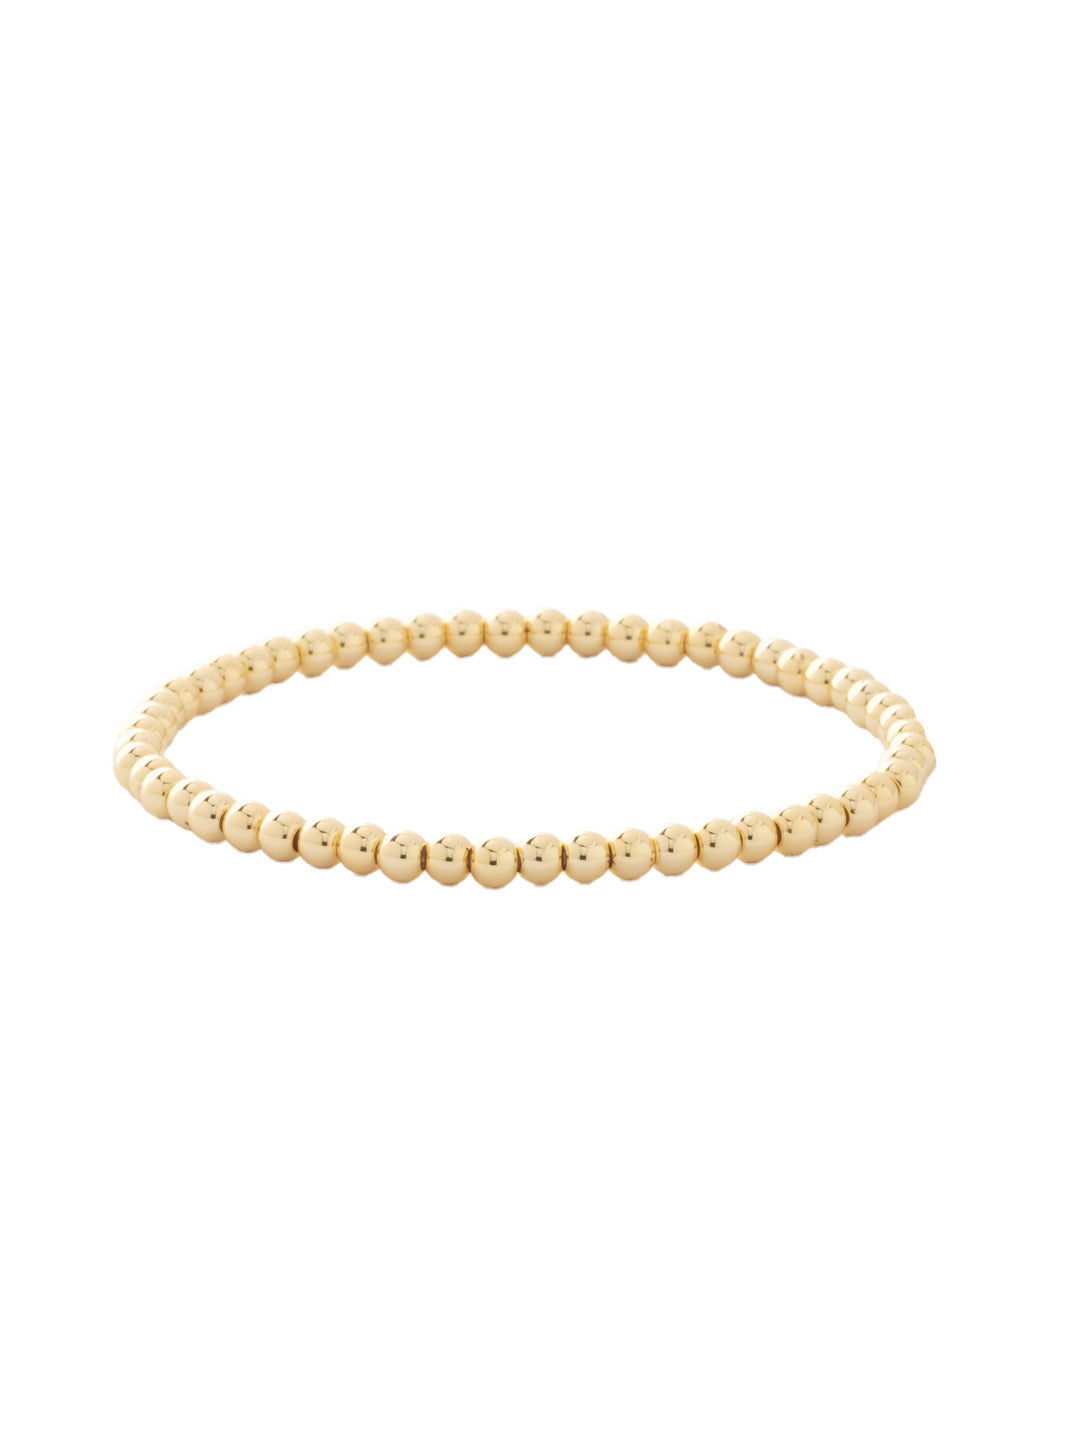 Mini Zola Stretch Bracelet - BFN20BGMTL - <p>A mini take on a best-selling style, the Mini Zola Stretch Bracelet features repeating metal beads on a multi-layered stretchy jewelry filament, creating a durable and trendy piece. From Sorrelli's Bare Metallic collection in our Bright Gold-tone finish.</p>